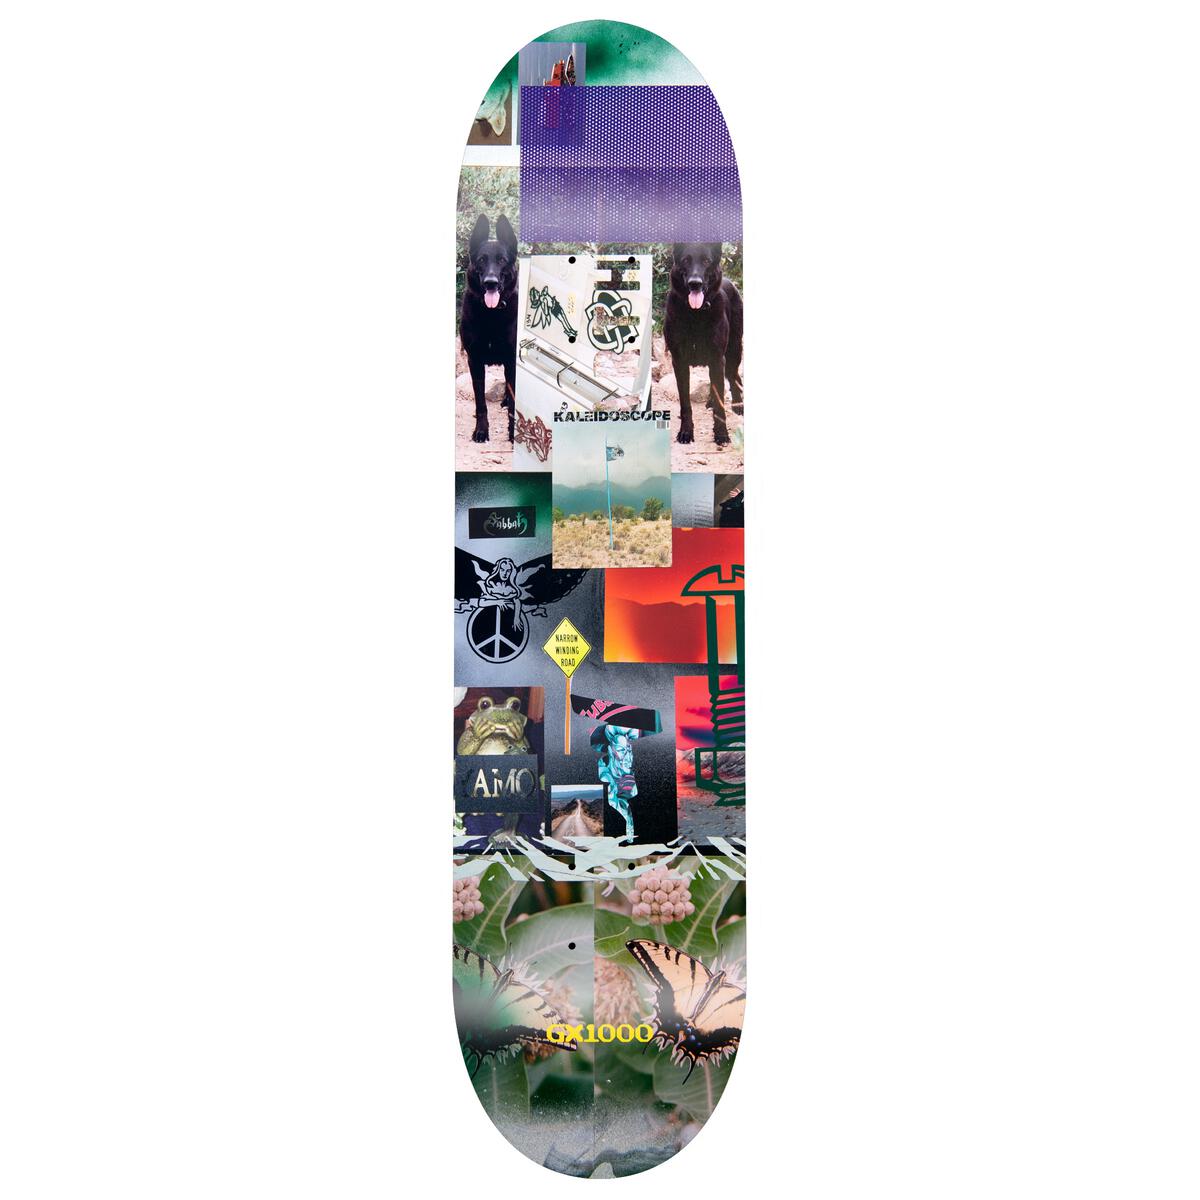 GX 1000 "Route 50 (Narrow Winding Road)" 8.625" Deck